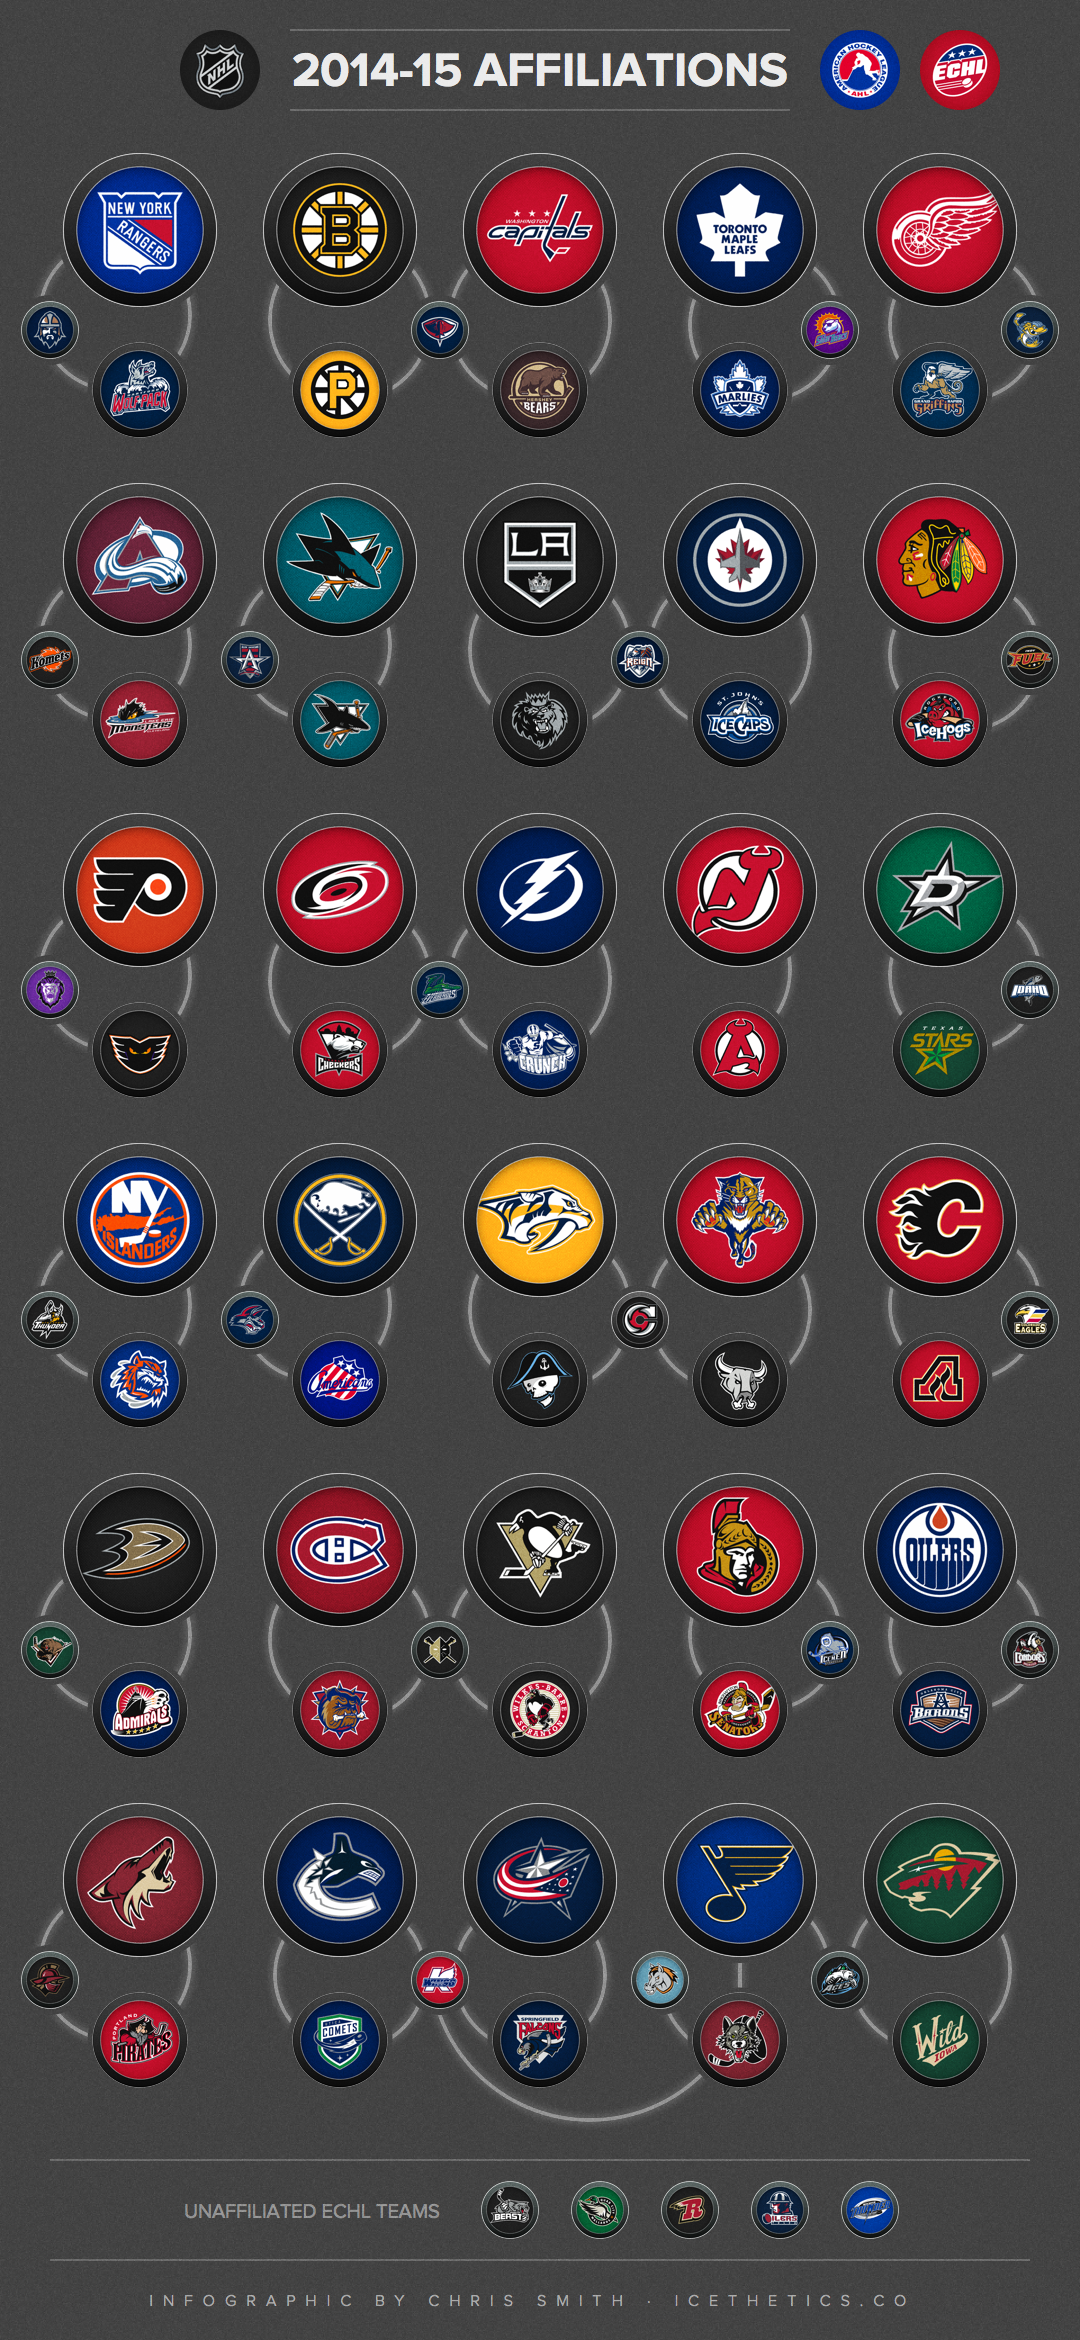 FYI: NHL team affiliations with AHL and ECHL teams